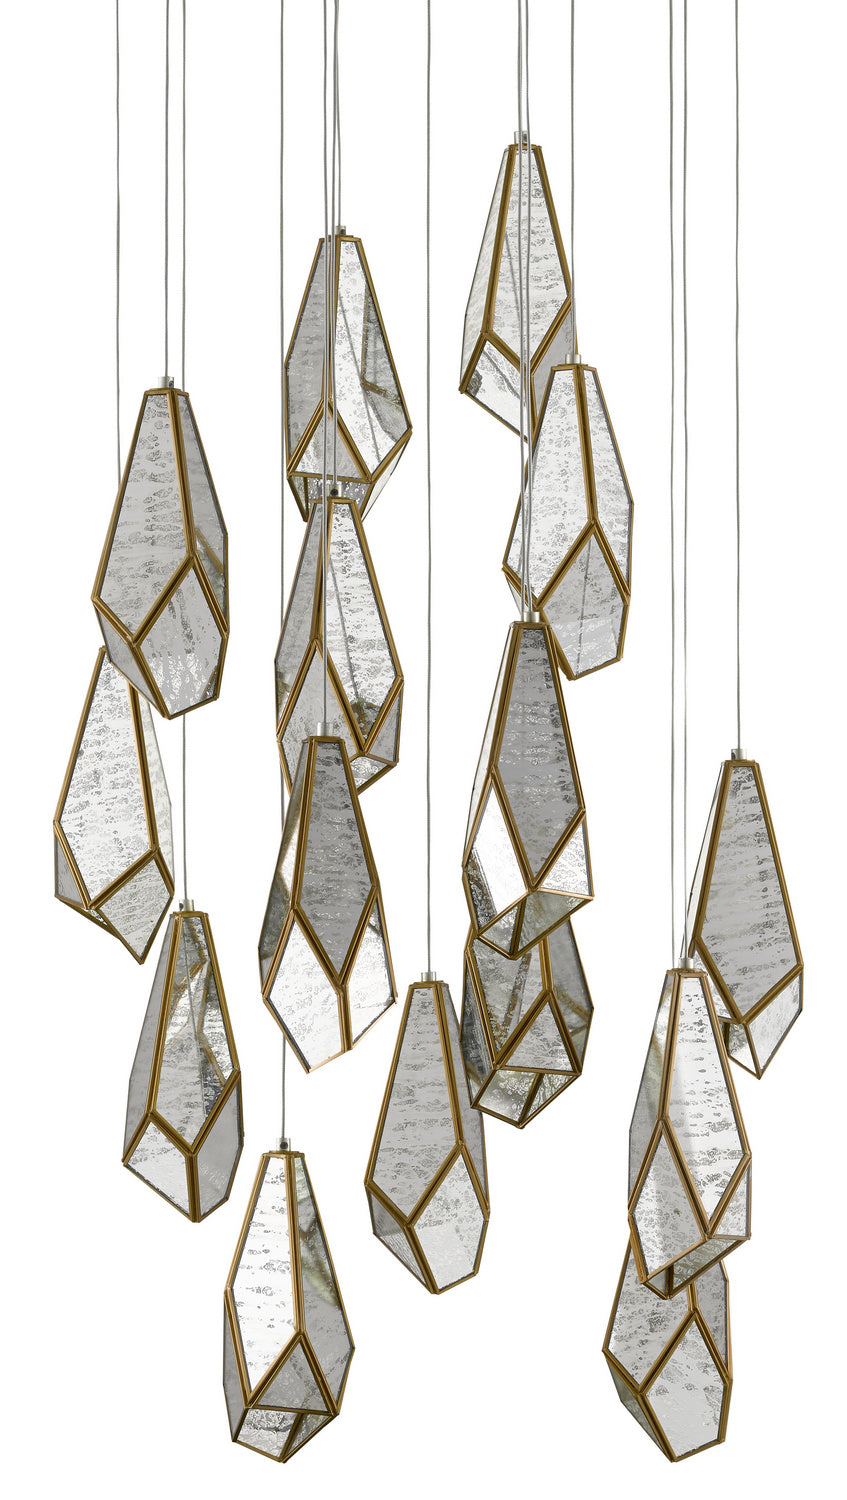 15 Light Pendant from the Glace collection in Painted Silver/Antique Brass finish